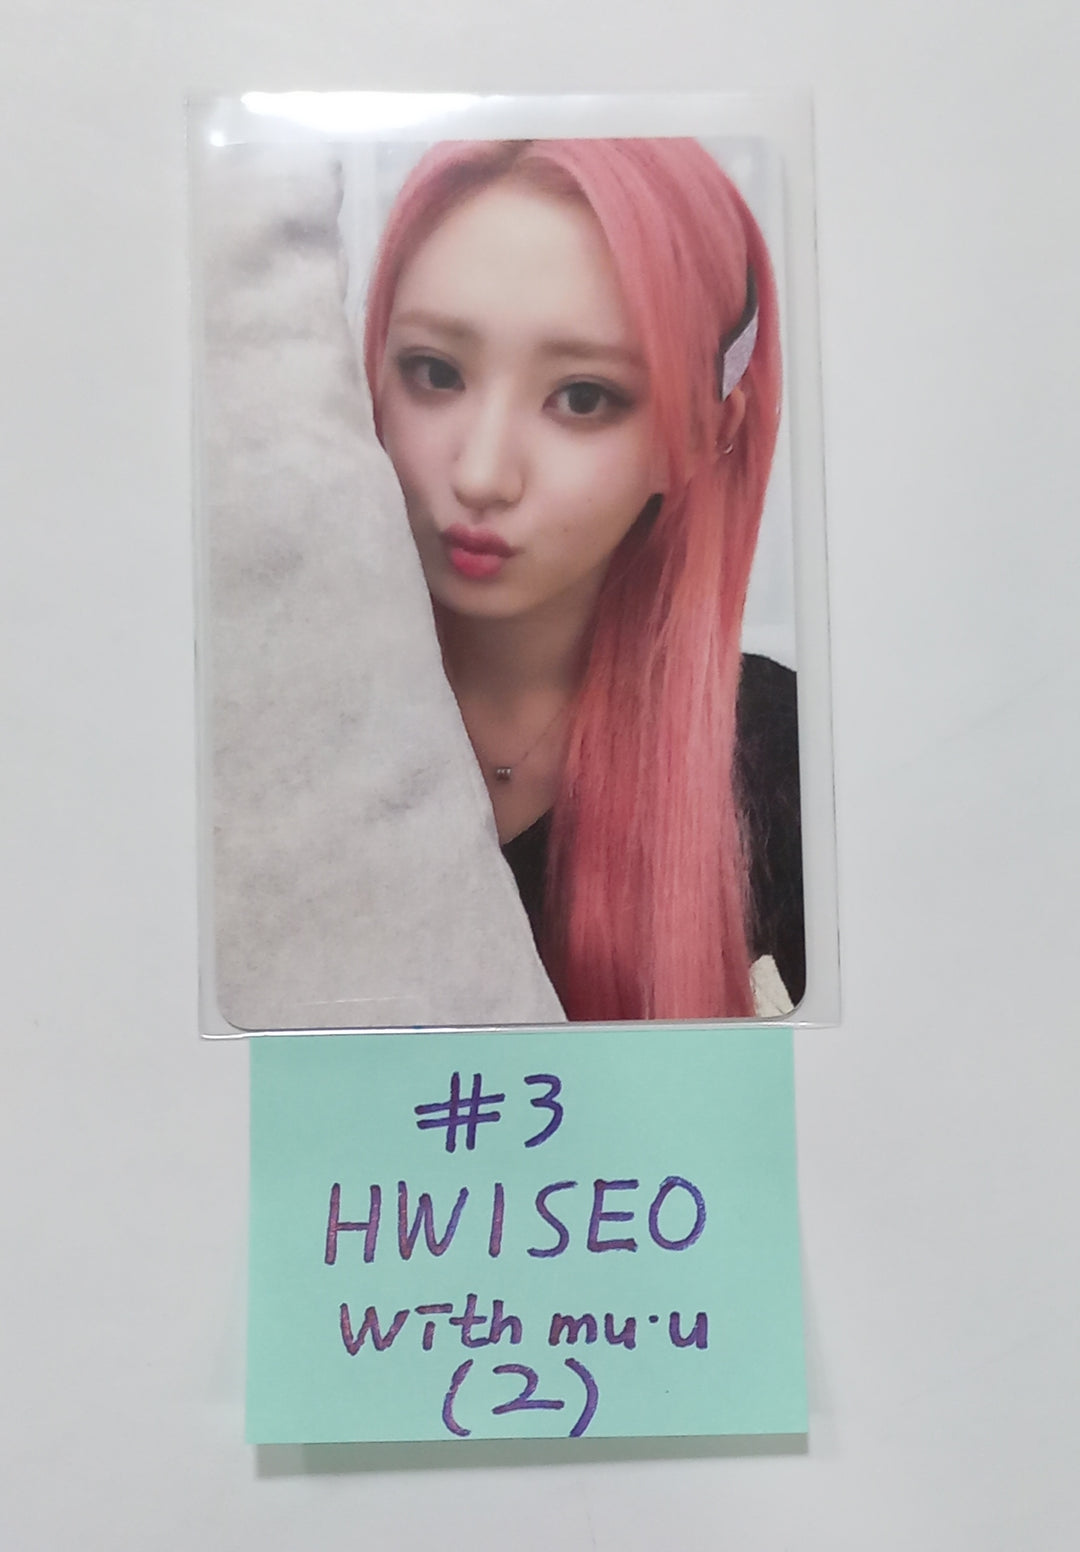 H1-KEY "Seoul Dreaming" - Withmuu Fansign Event Photocard Round 2 [23.09.20]